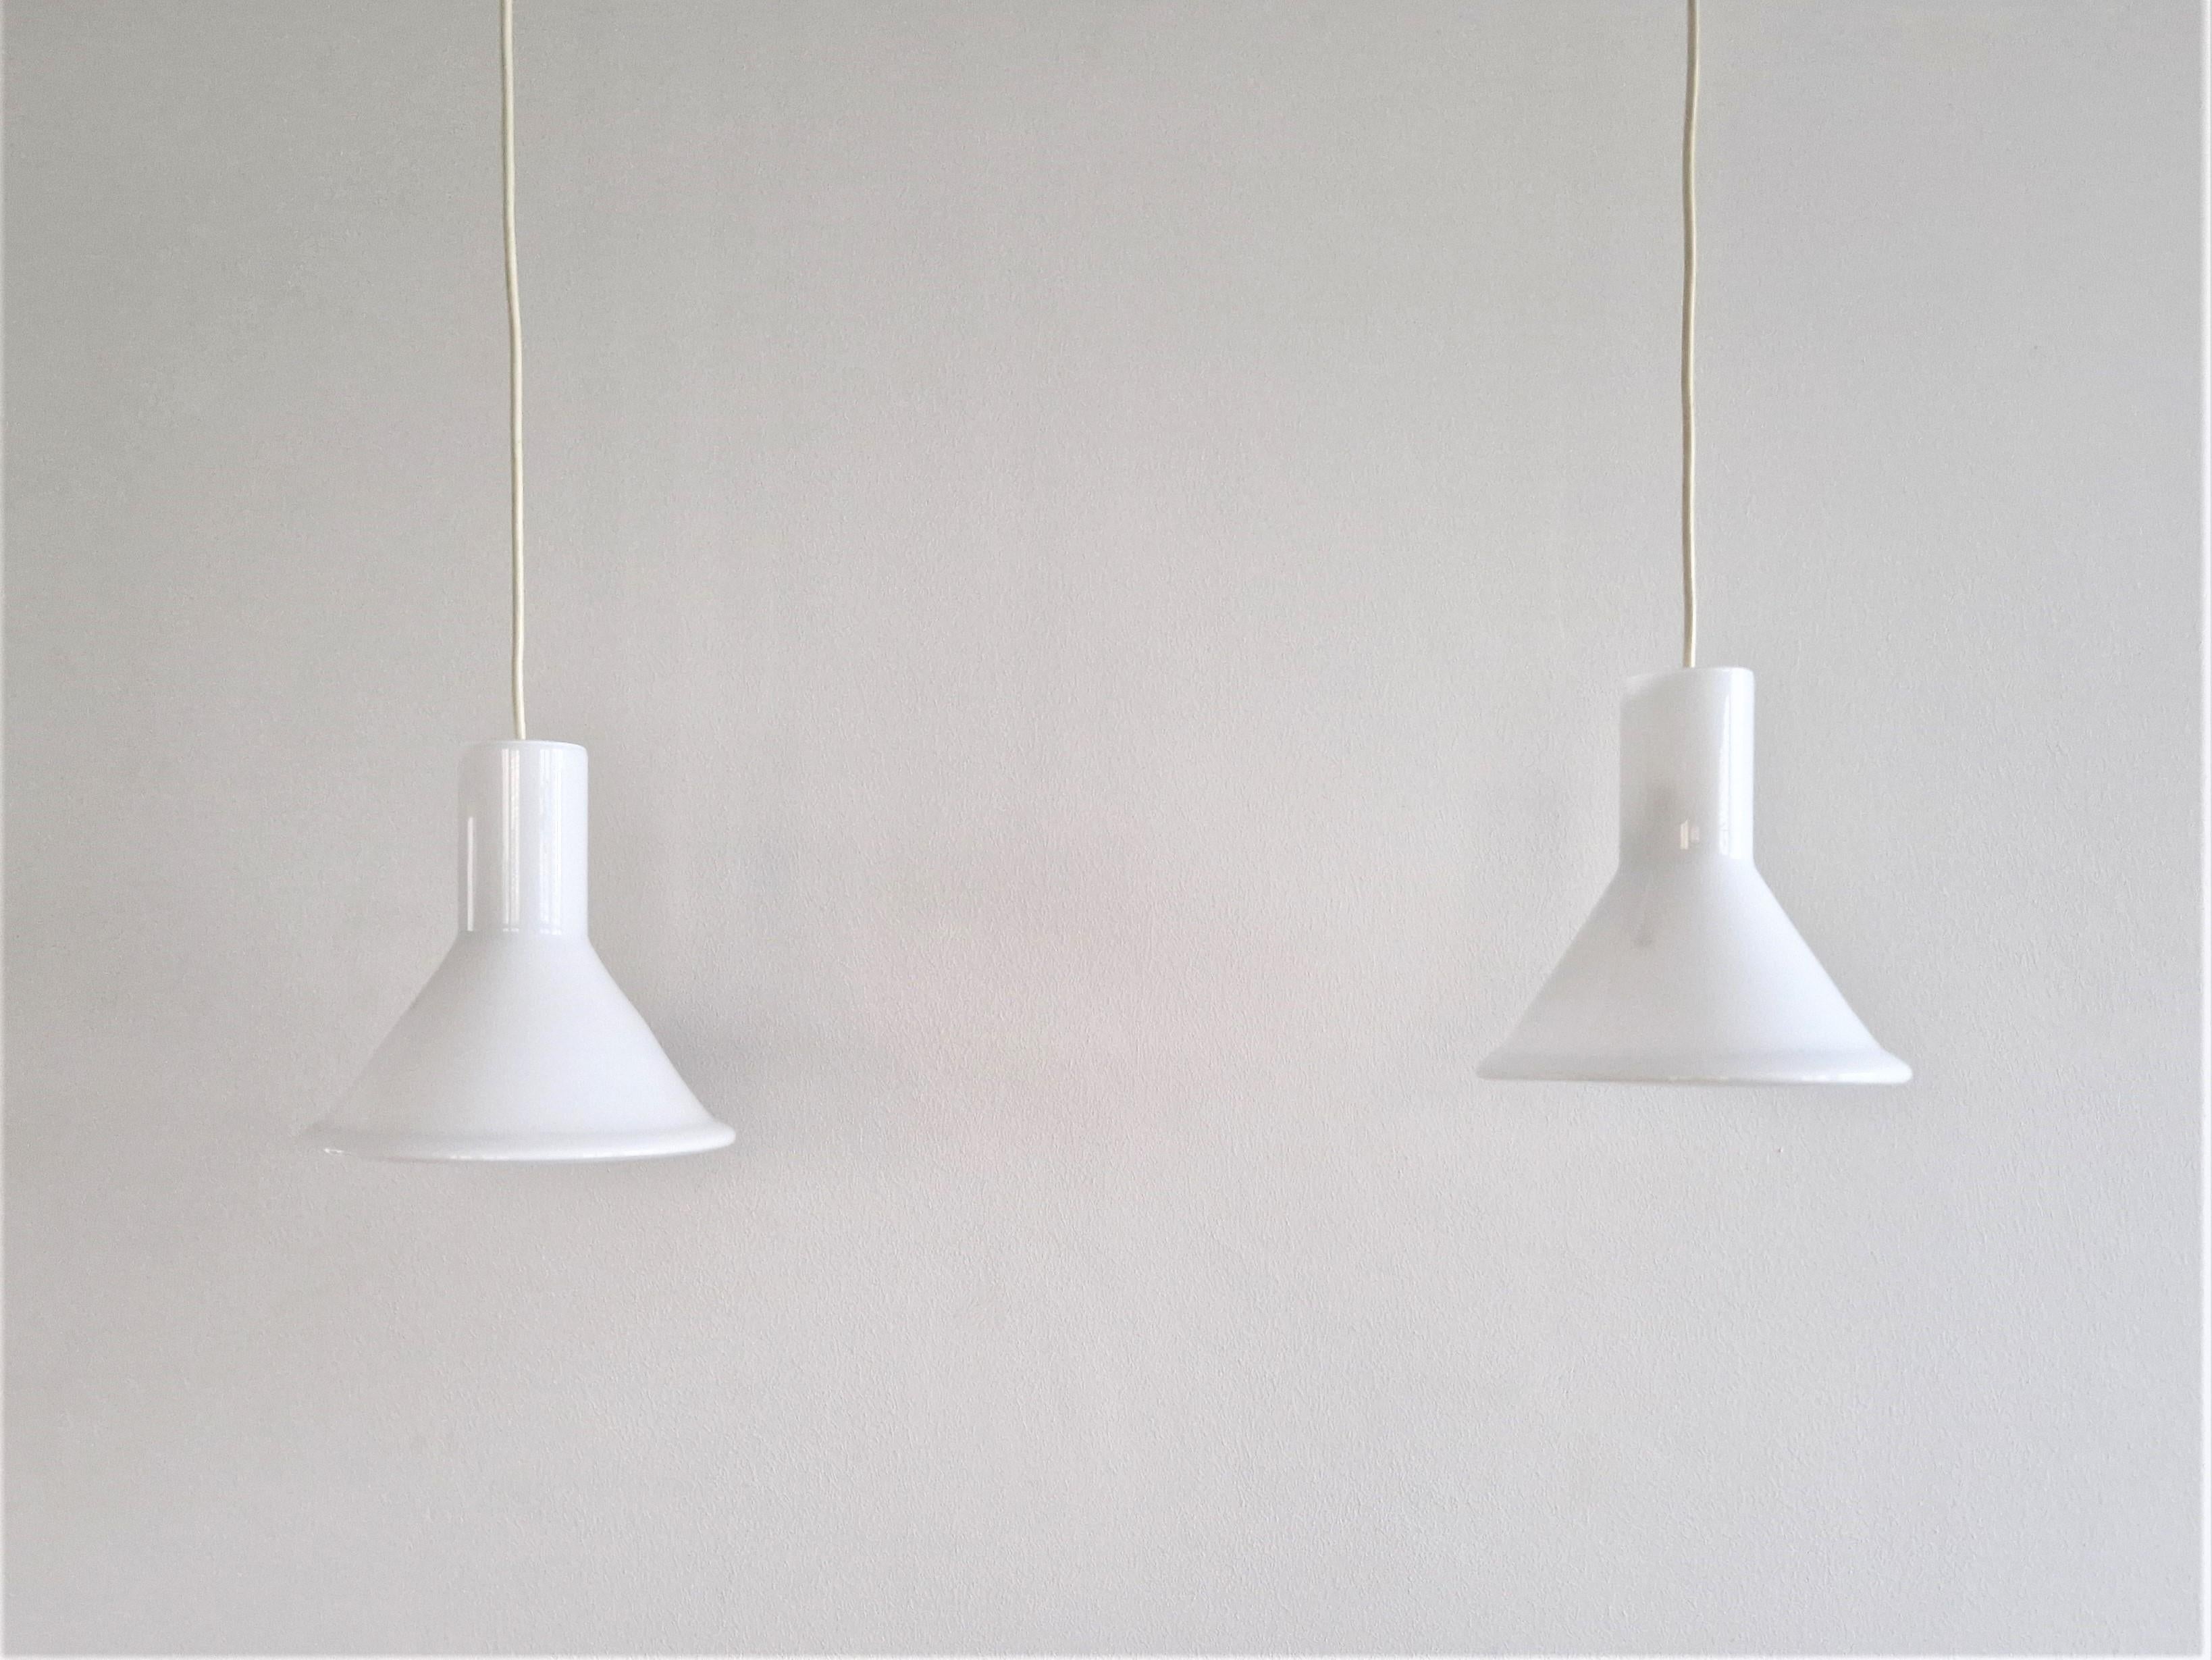 This set of 2 'Mini P&T' pendant lamps was designed by Michael Bang for Holmegaard in the 1970s. The Danish design lamp is made of white opaline glass. When lit, it gives a beautiful soft white light. These lamps are marked at the inside by